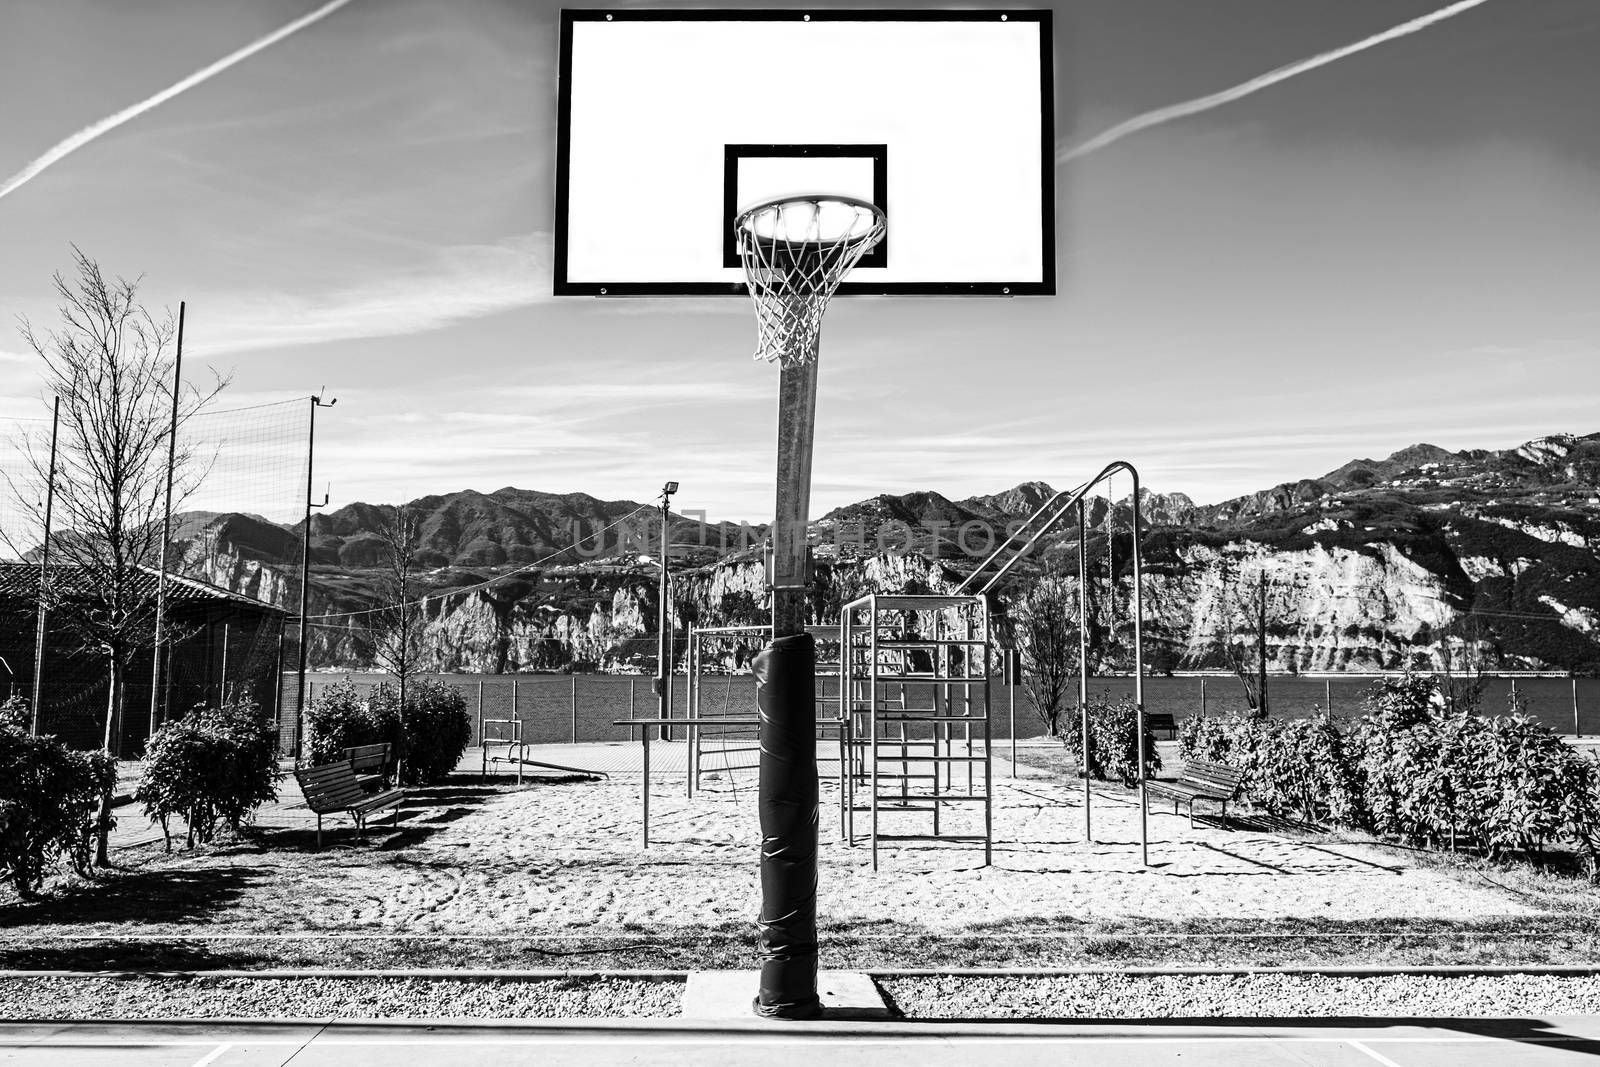 Deserted sports field on the shores of Lake Garda in Italy in black and white.